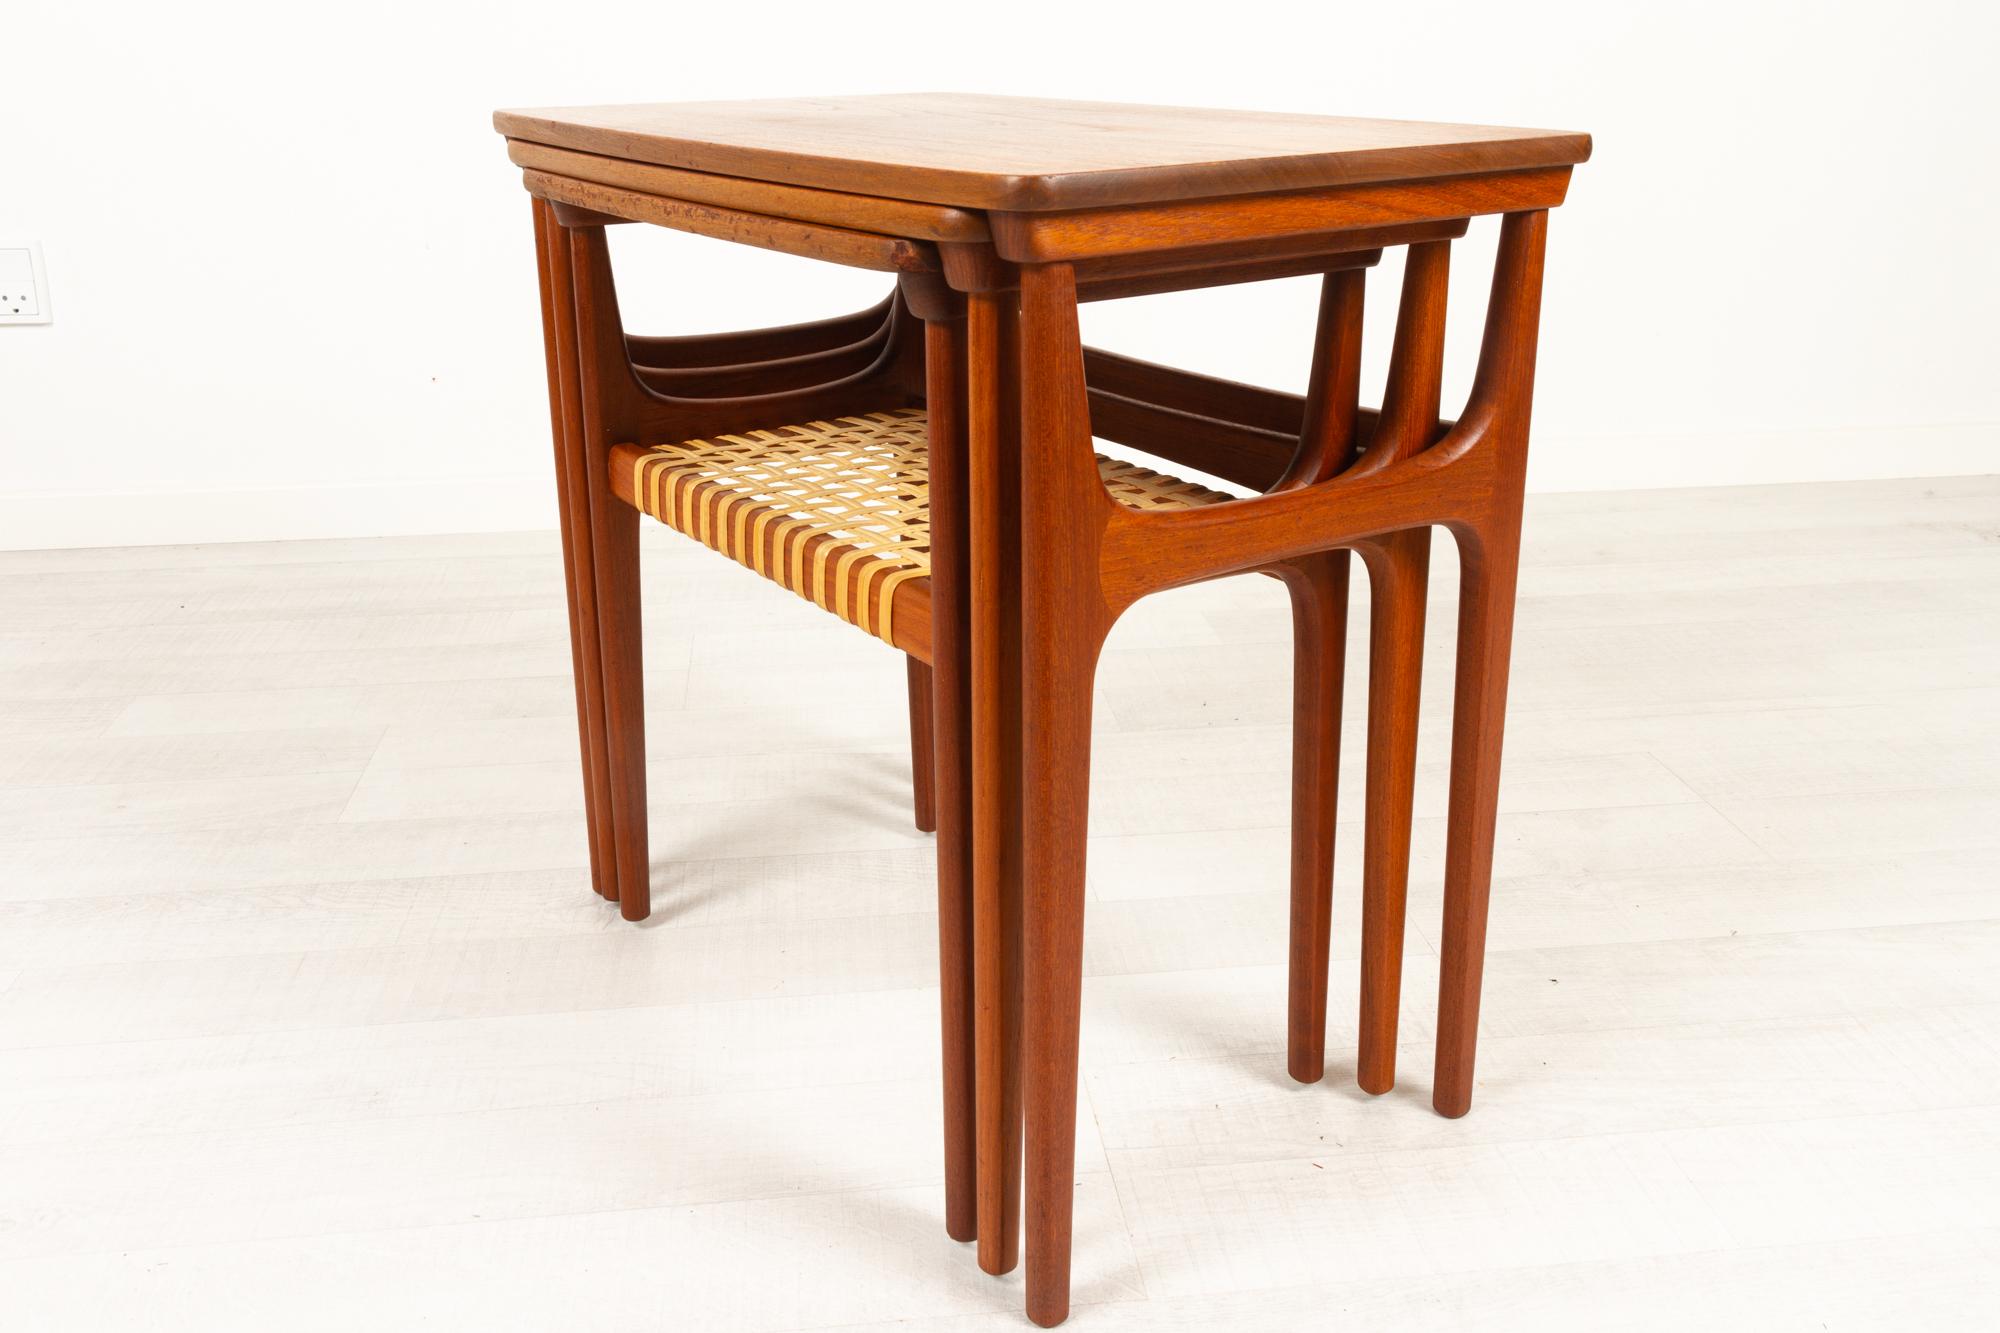 Vintage Danish teak nesting tables by Erling Torvits for Heltborg Møbler 1960s
Set of three Danish Mid-Century Modern Model No. 15 nesting tables designed by Danish architect Erling Torvits in 1956. Frames in solid teak with tapered rounded legs.